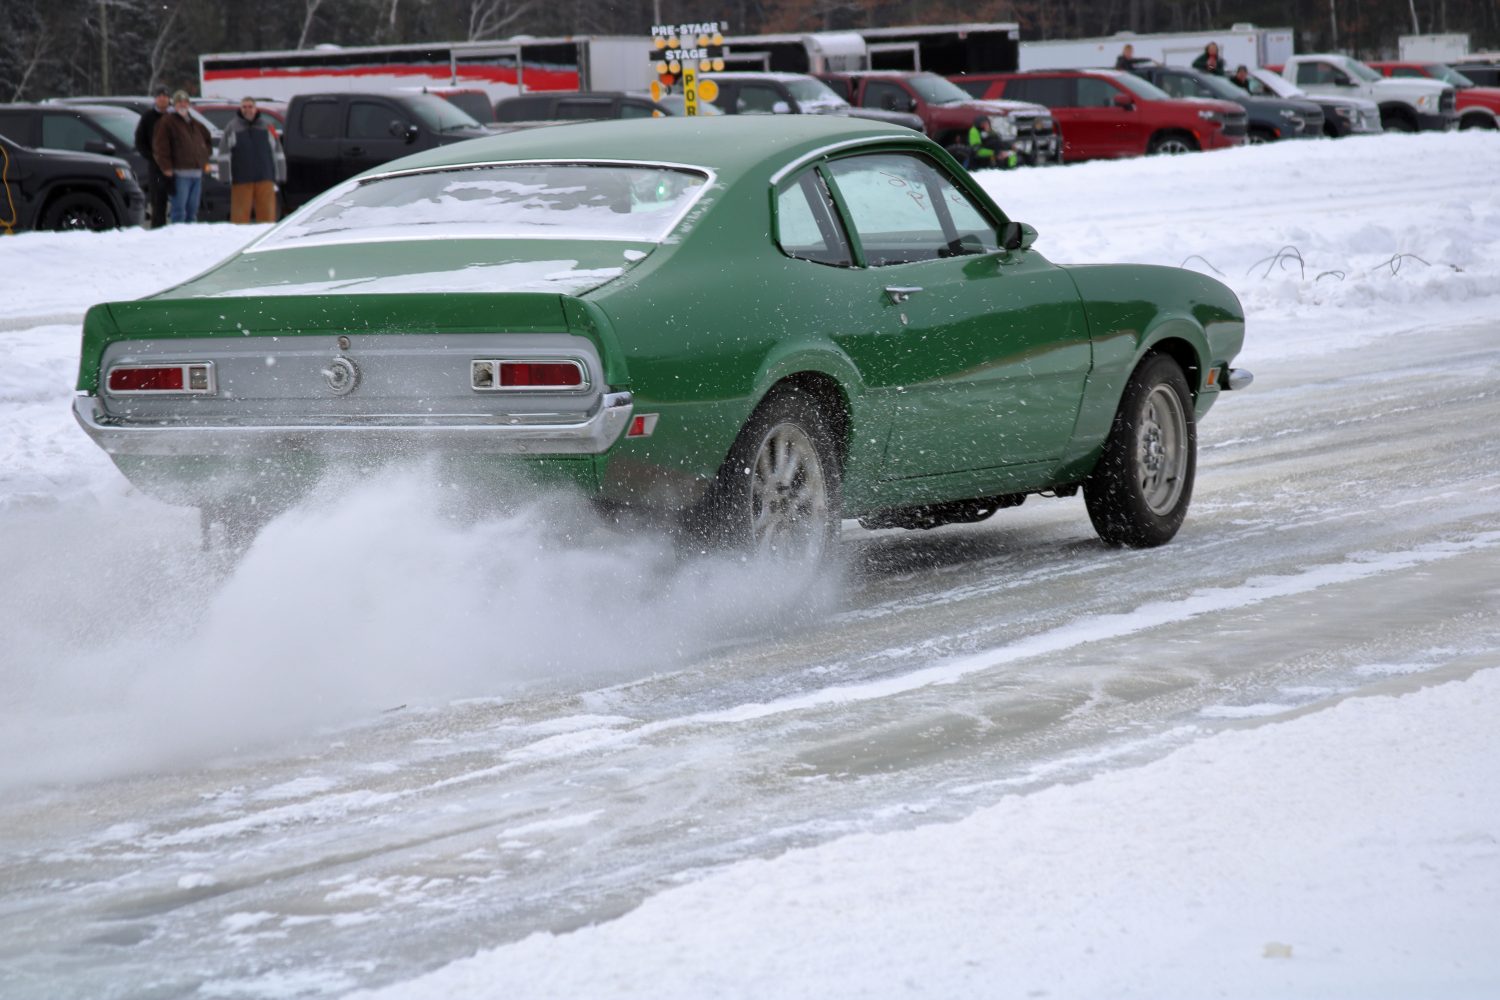 World Championship Merrill Ice Drags Week 2 & Week 3 results